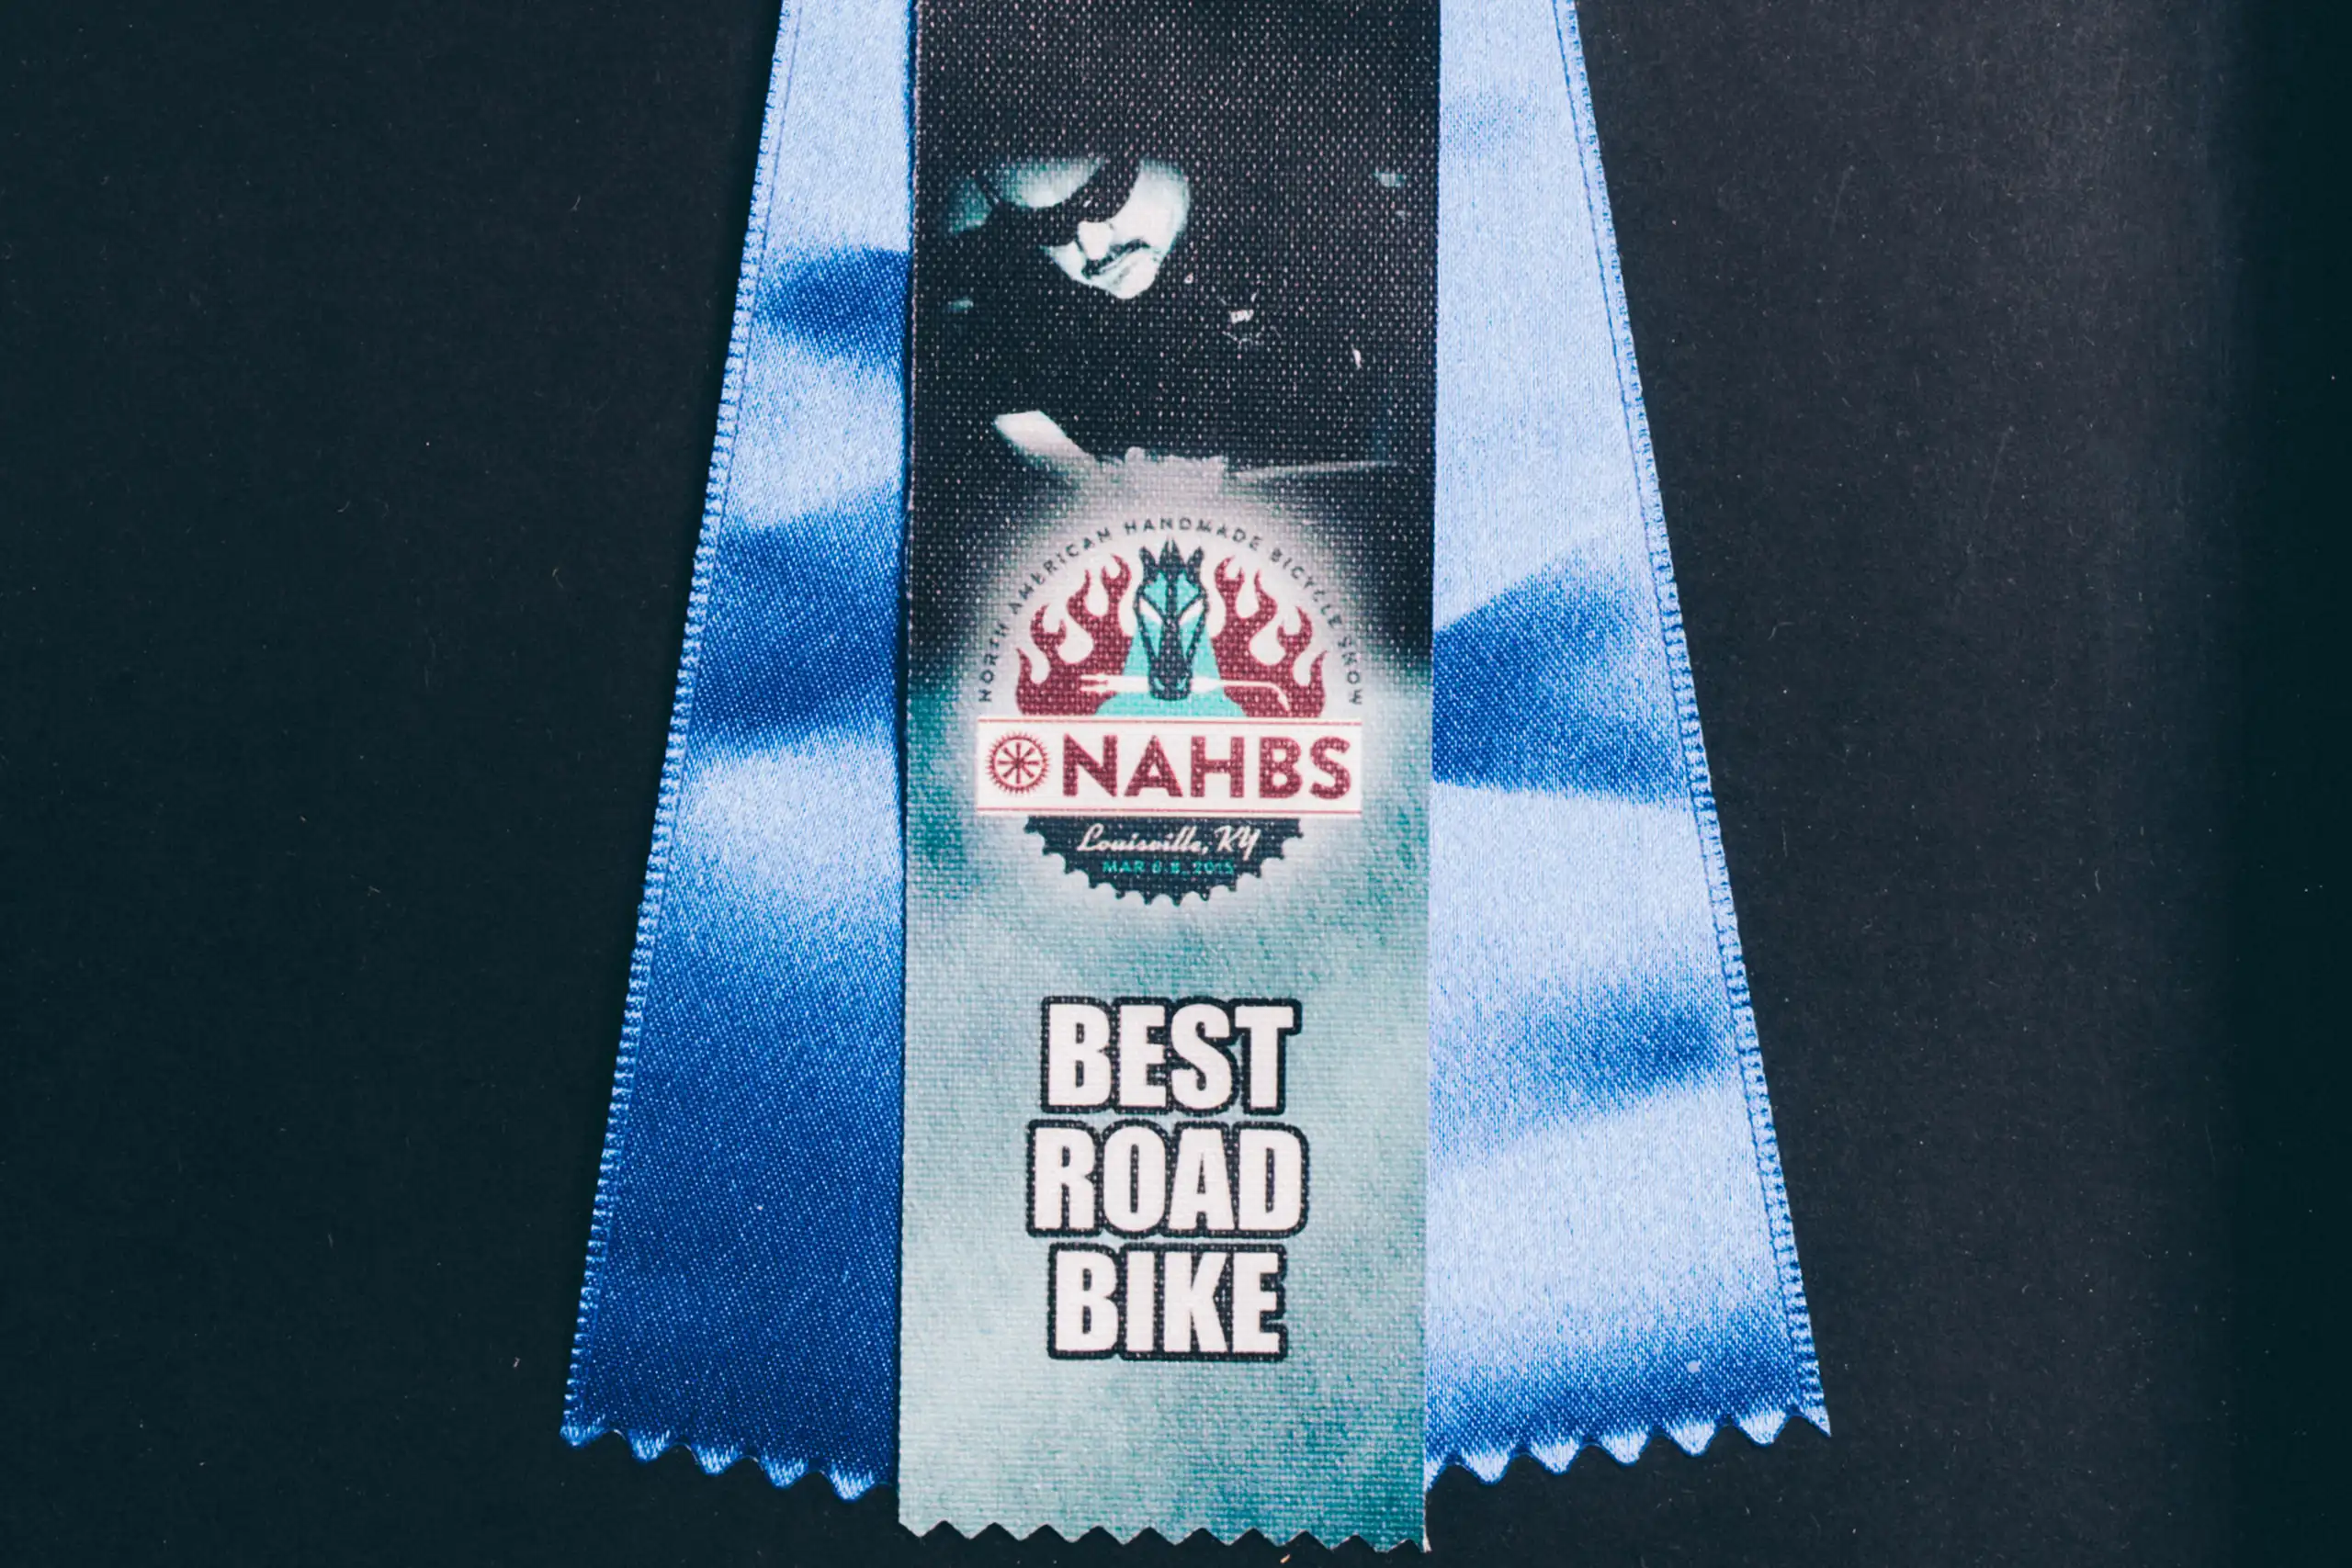 NAHBS – The memories from a journey that turned a dream into reality